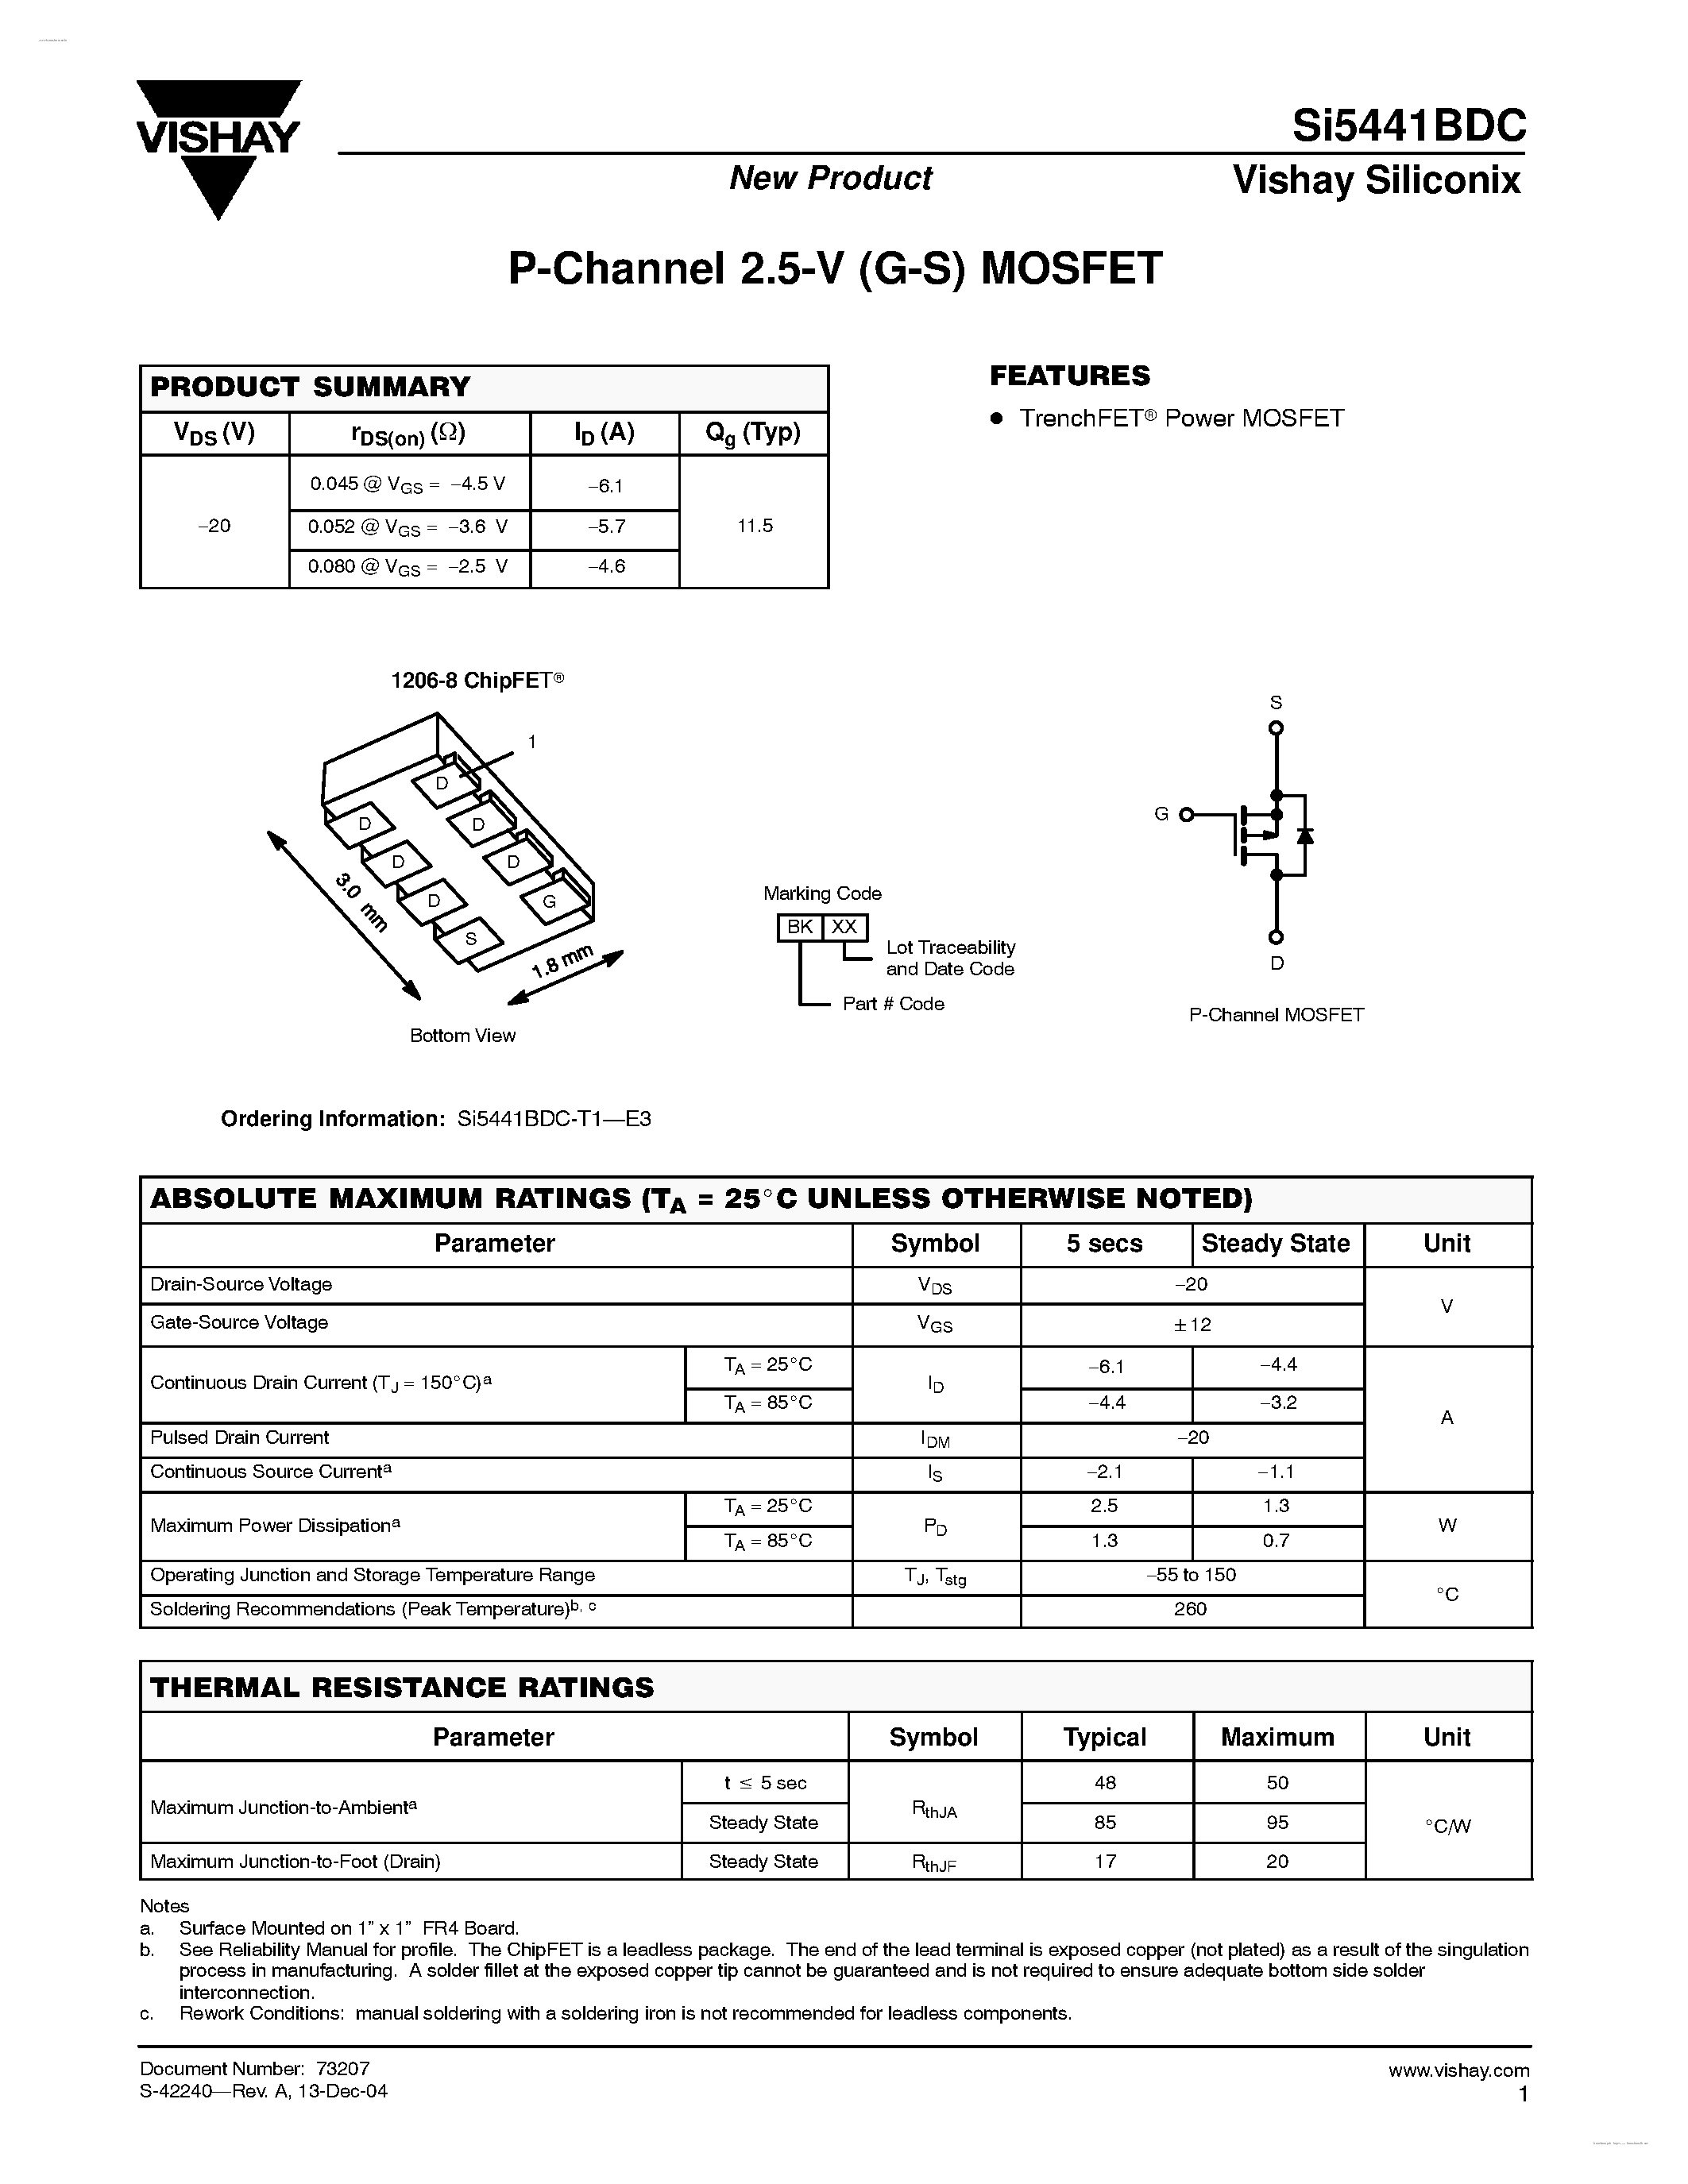 Даташит SI5441BDC - P-Channel 2.5-V (G-S) MOSFET страница 1